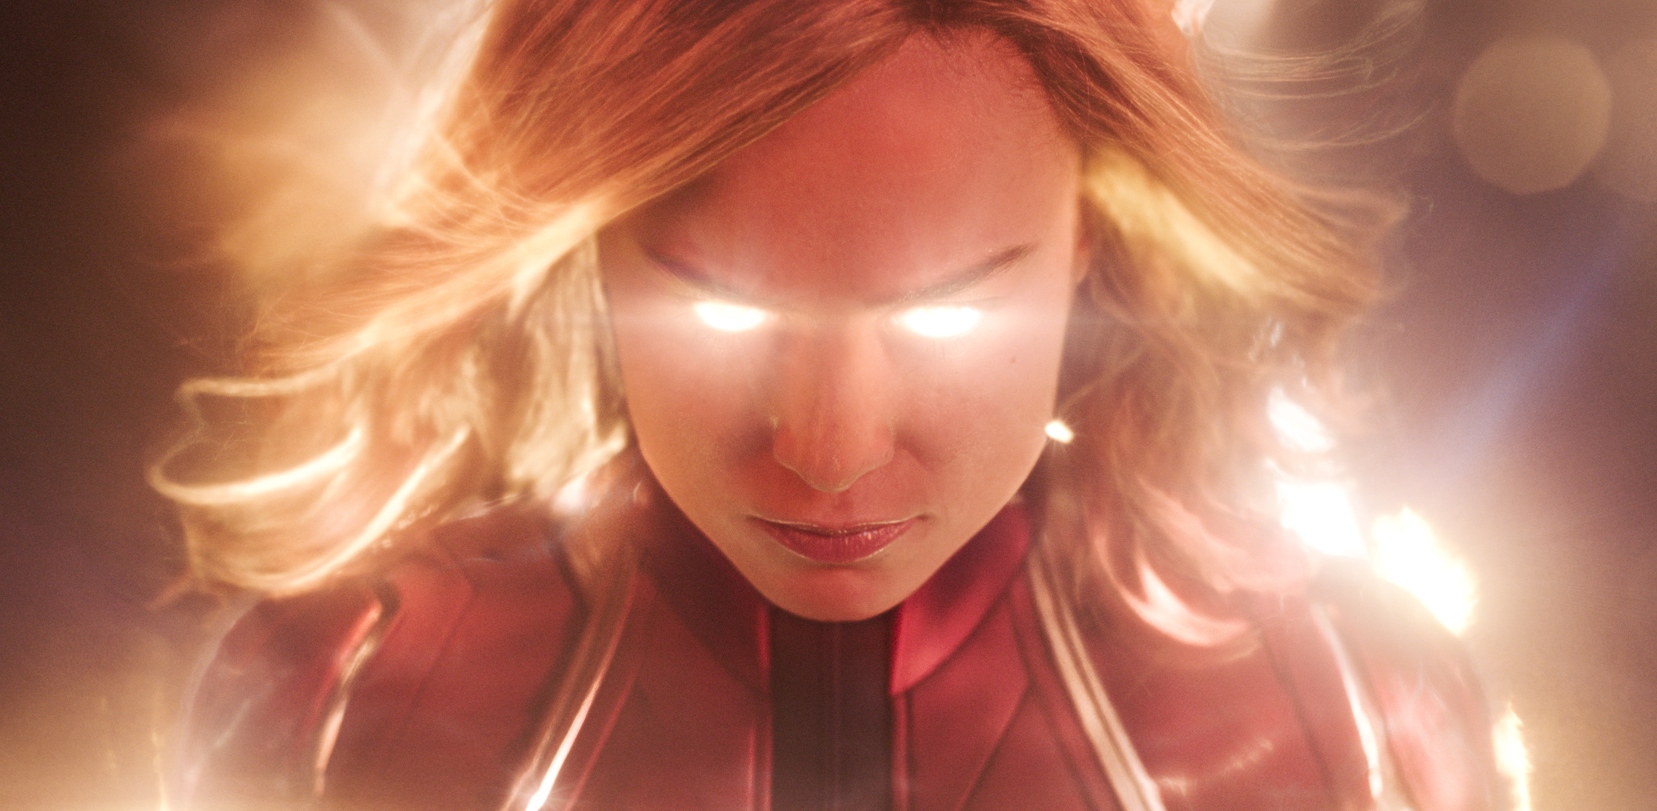 CAPTAIN MARVEL Isn’t Marvelous, But Does Enough to Keep Fans Entertained